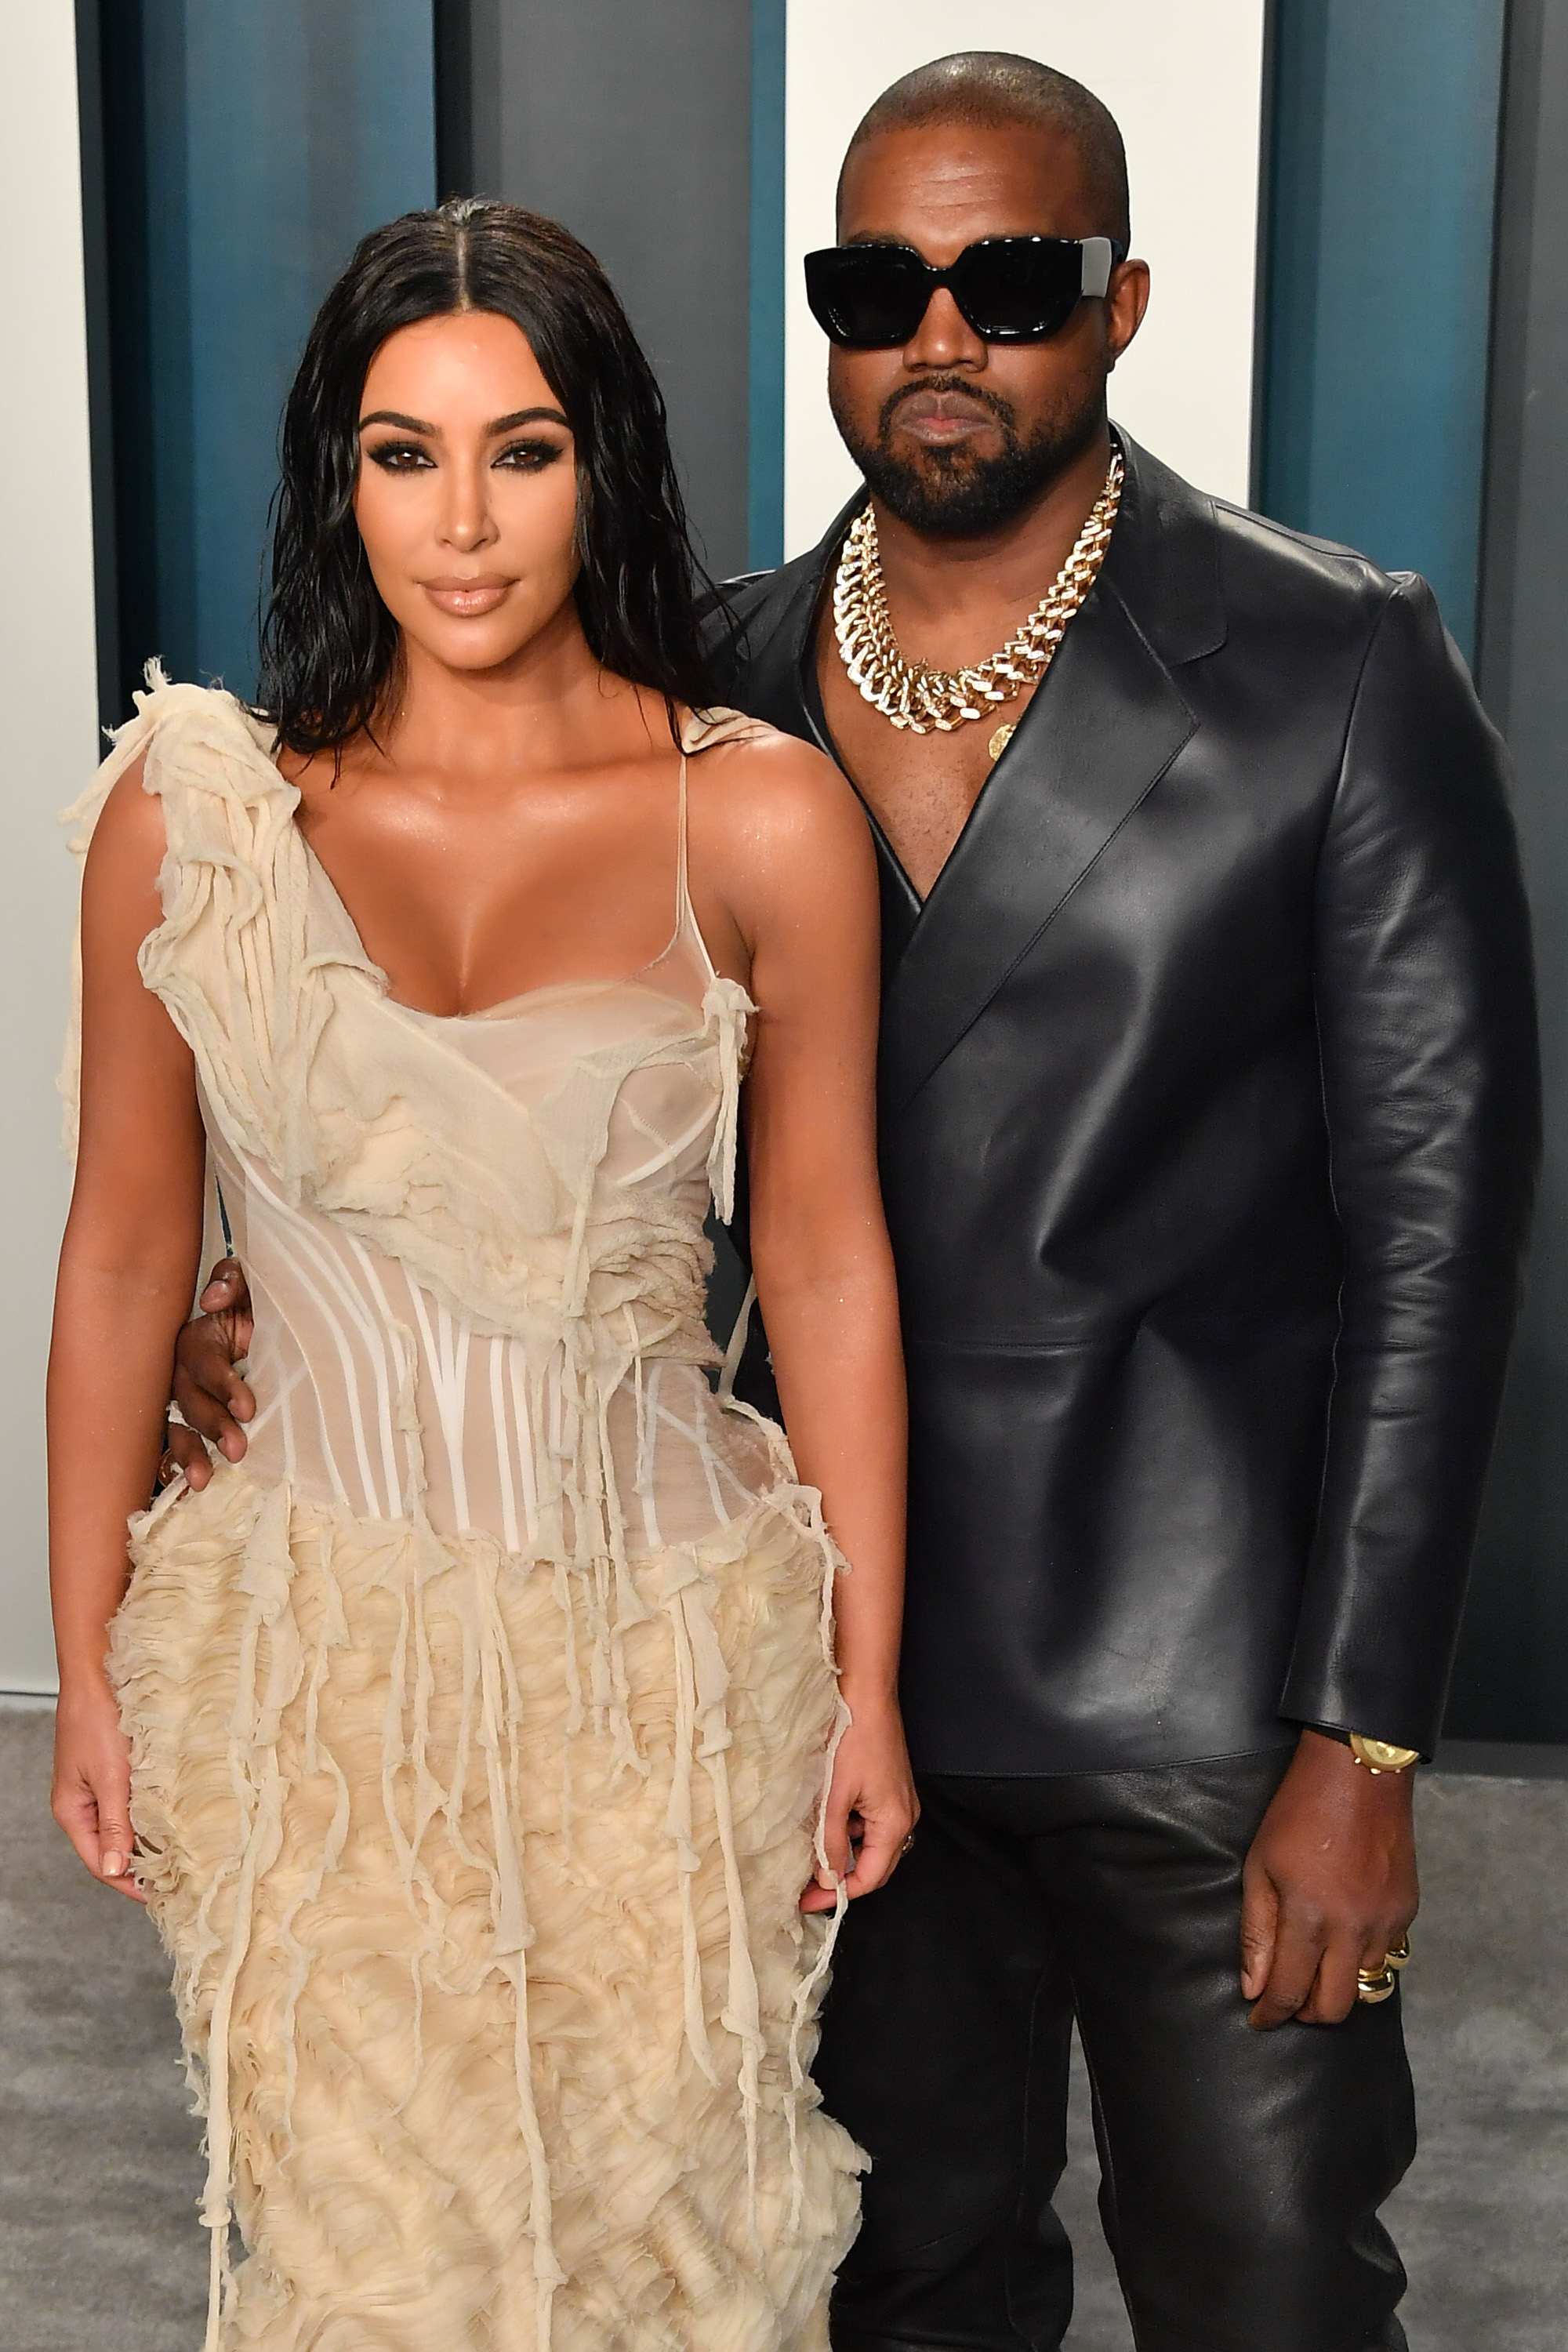 Kim and Kanye attended the Vanity Fair after-party in 2020